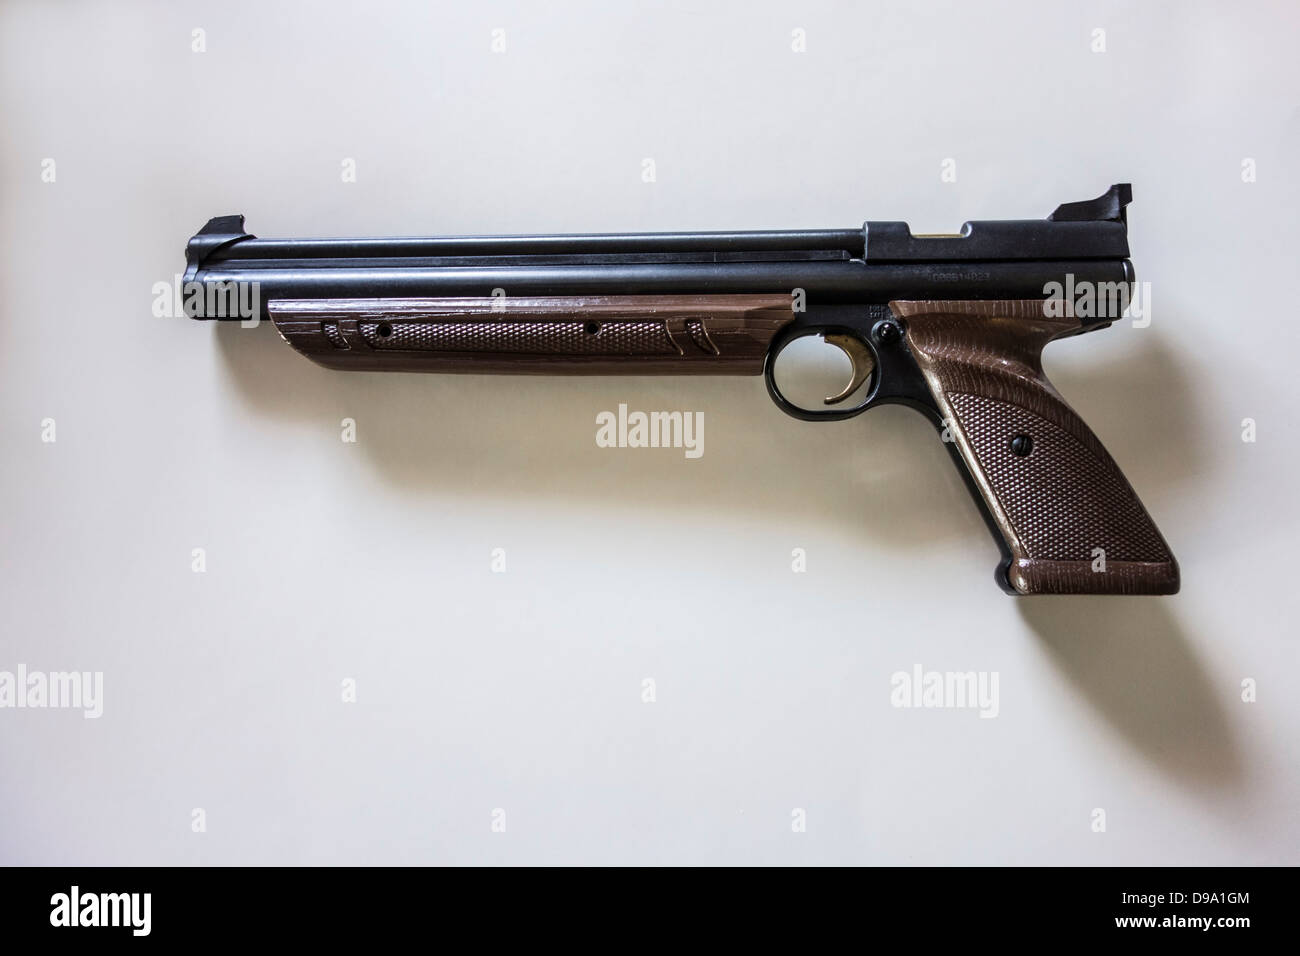 A pellet or BB pistol on a white background. USA. Stock Photo